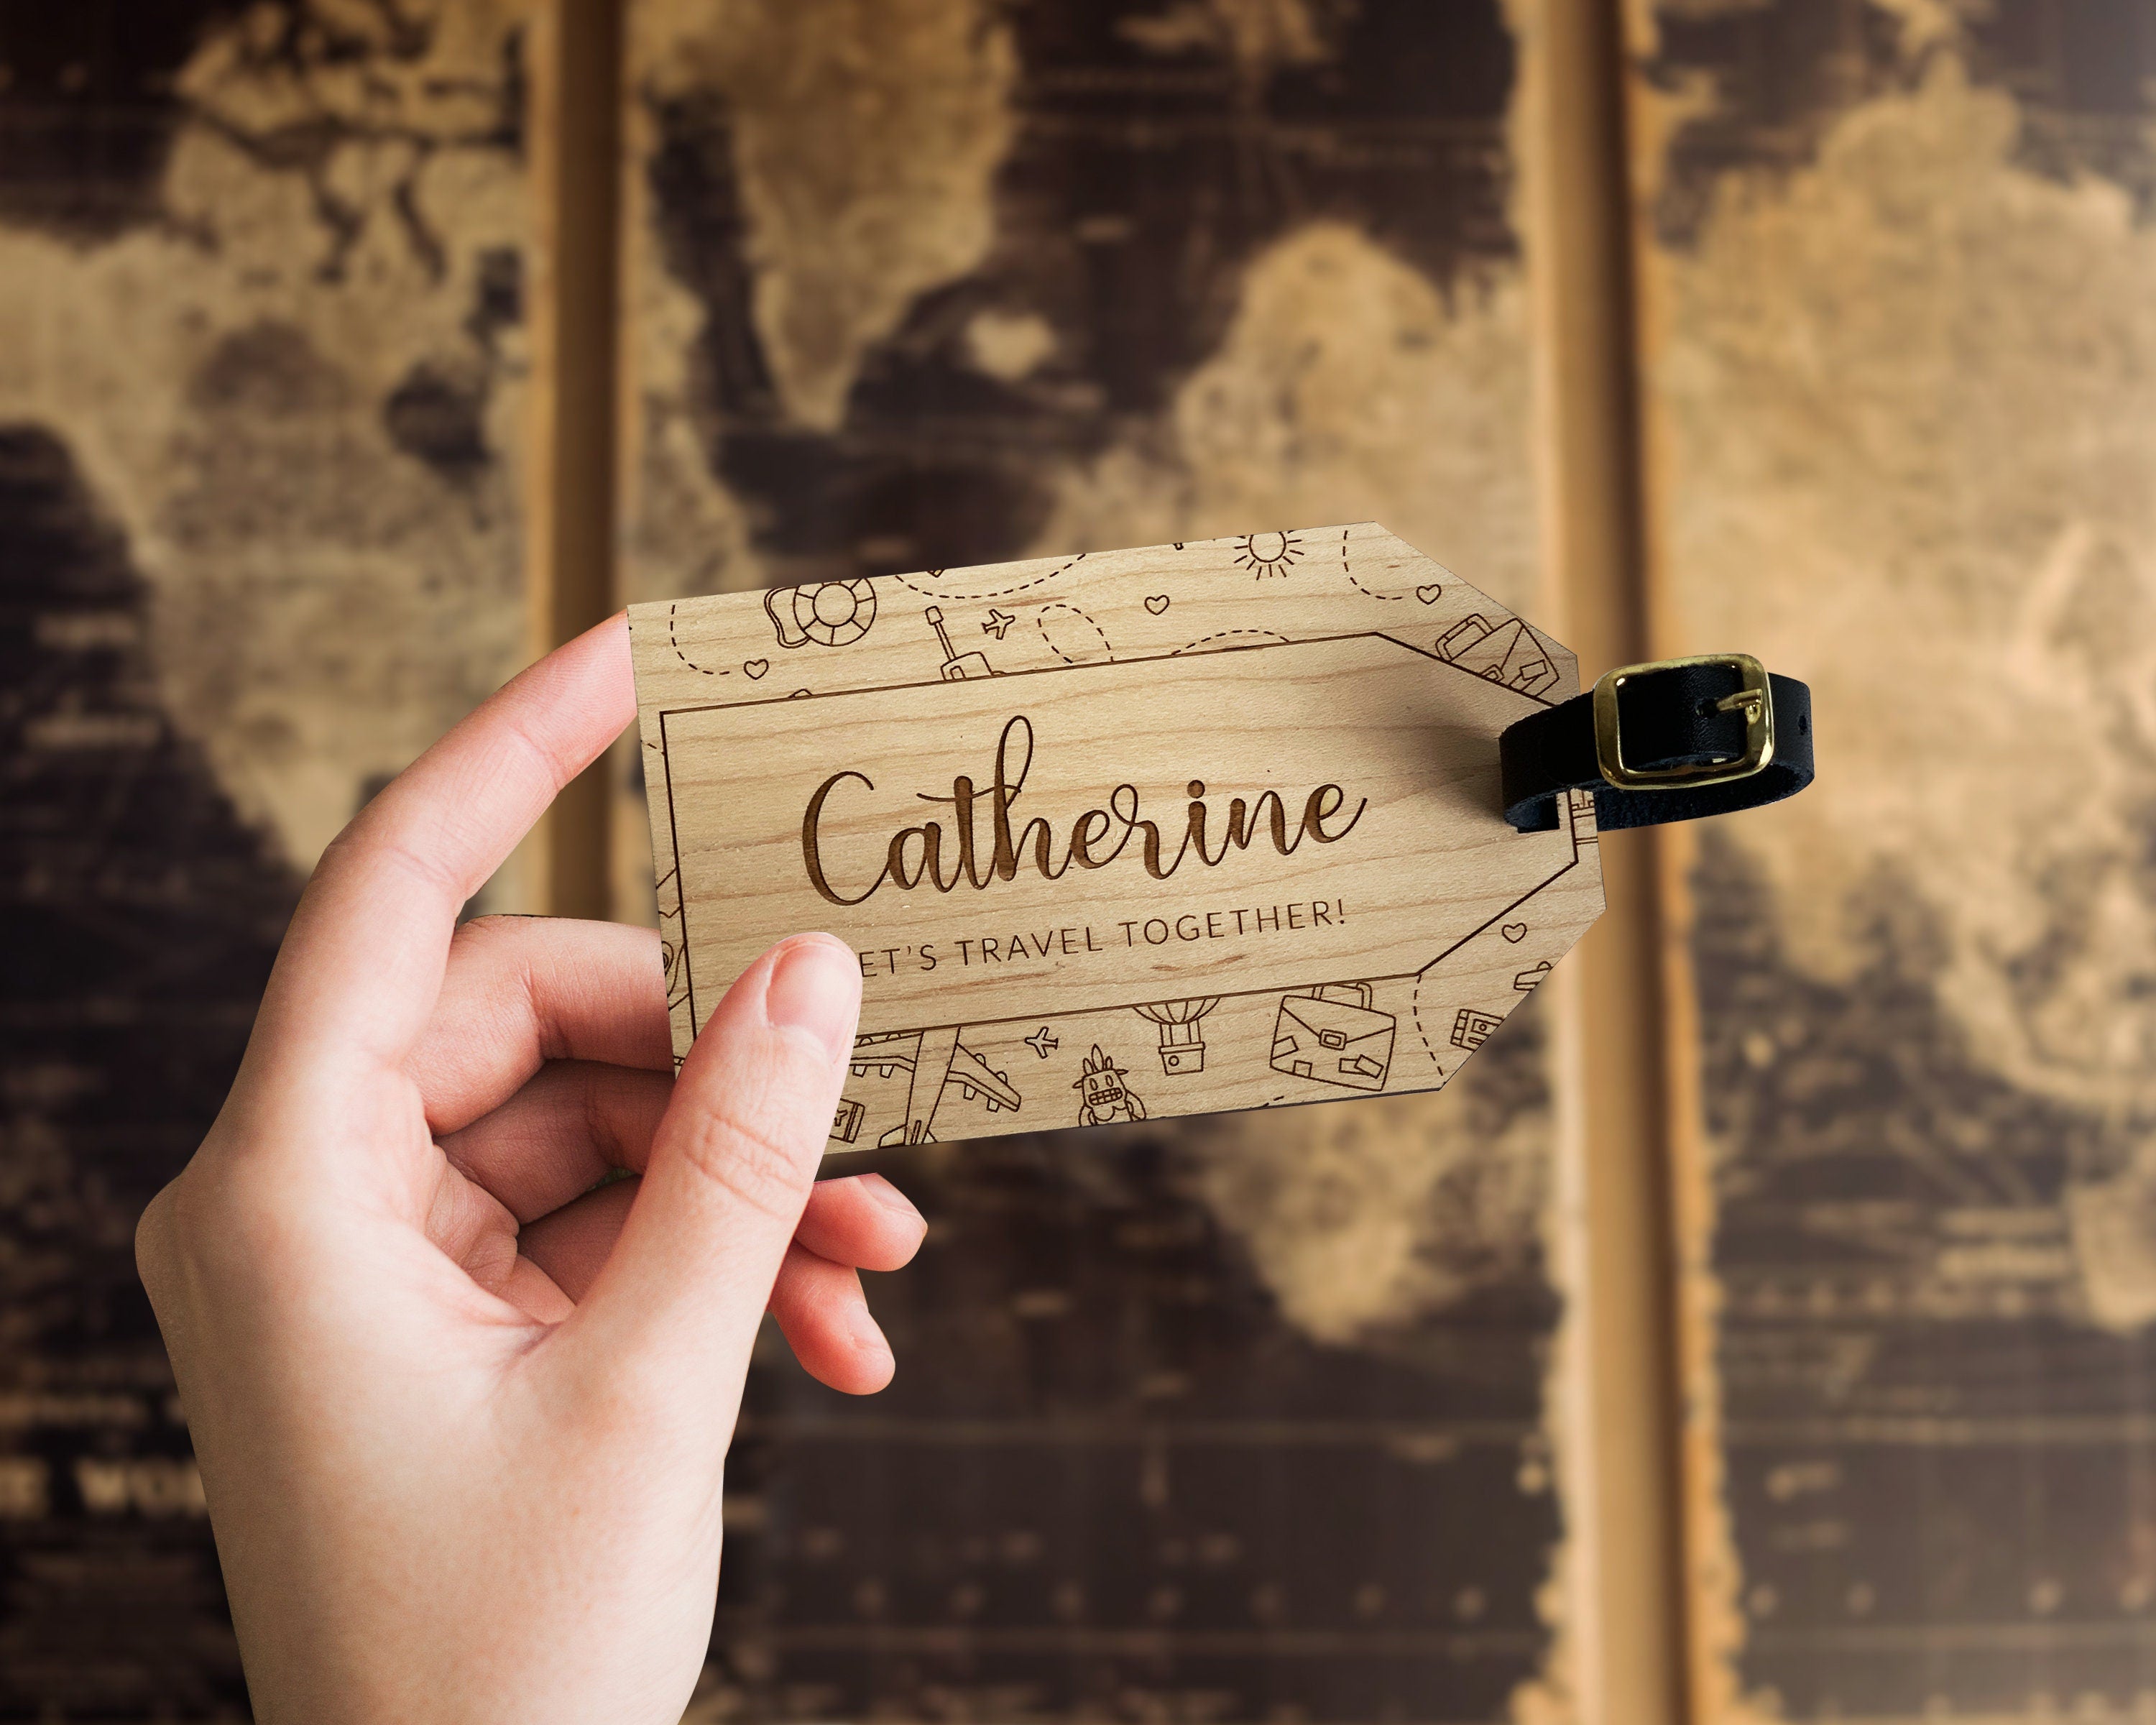 Personalised Wooden Luggage Tag - Lets Travel Together